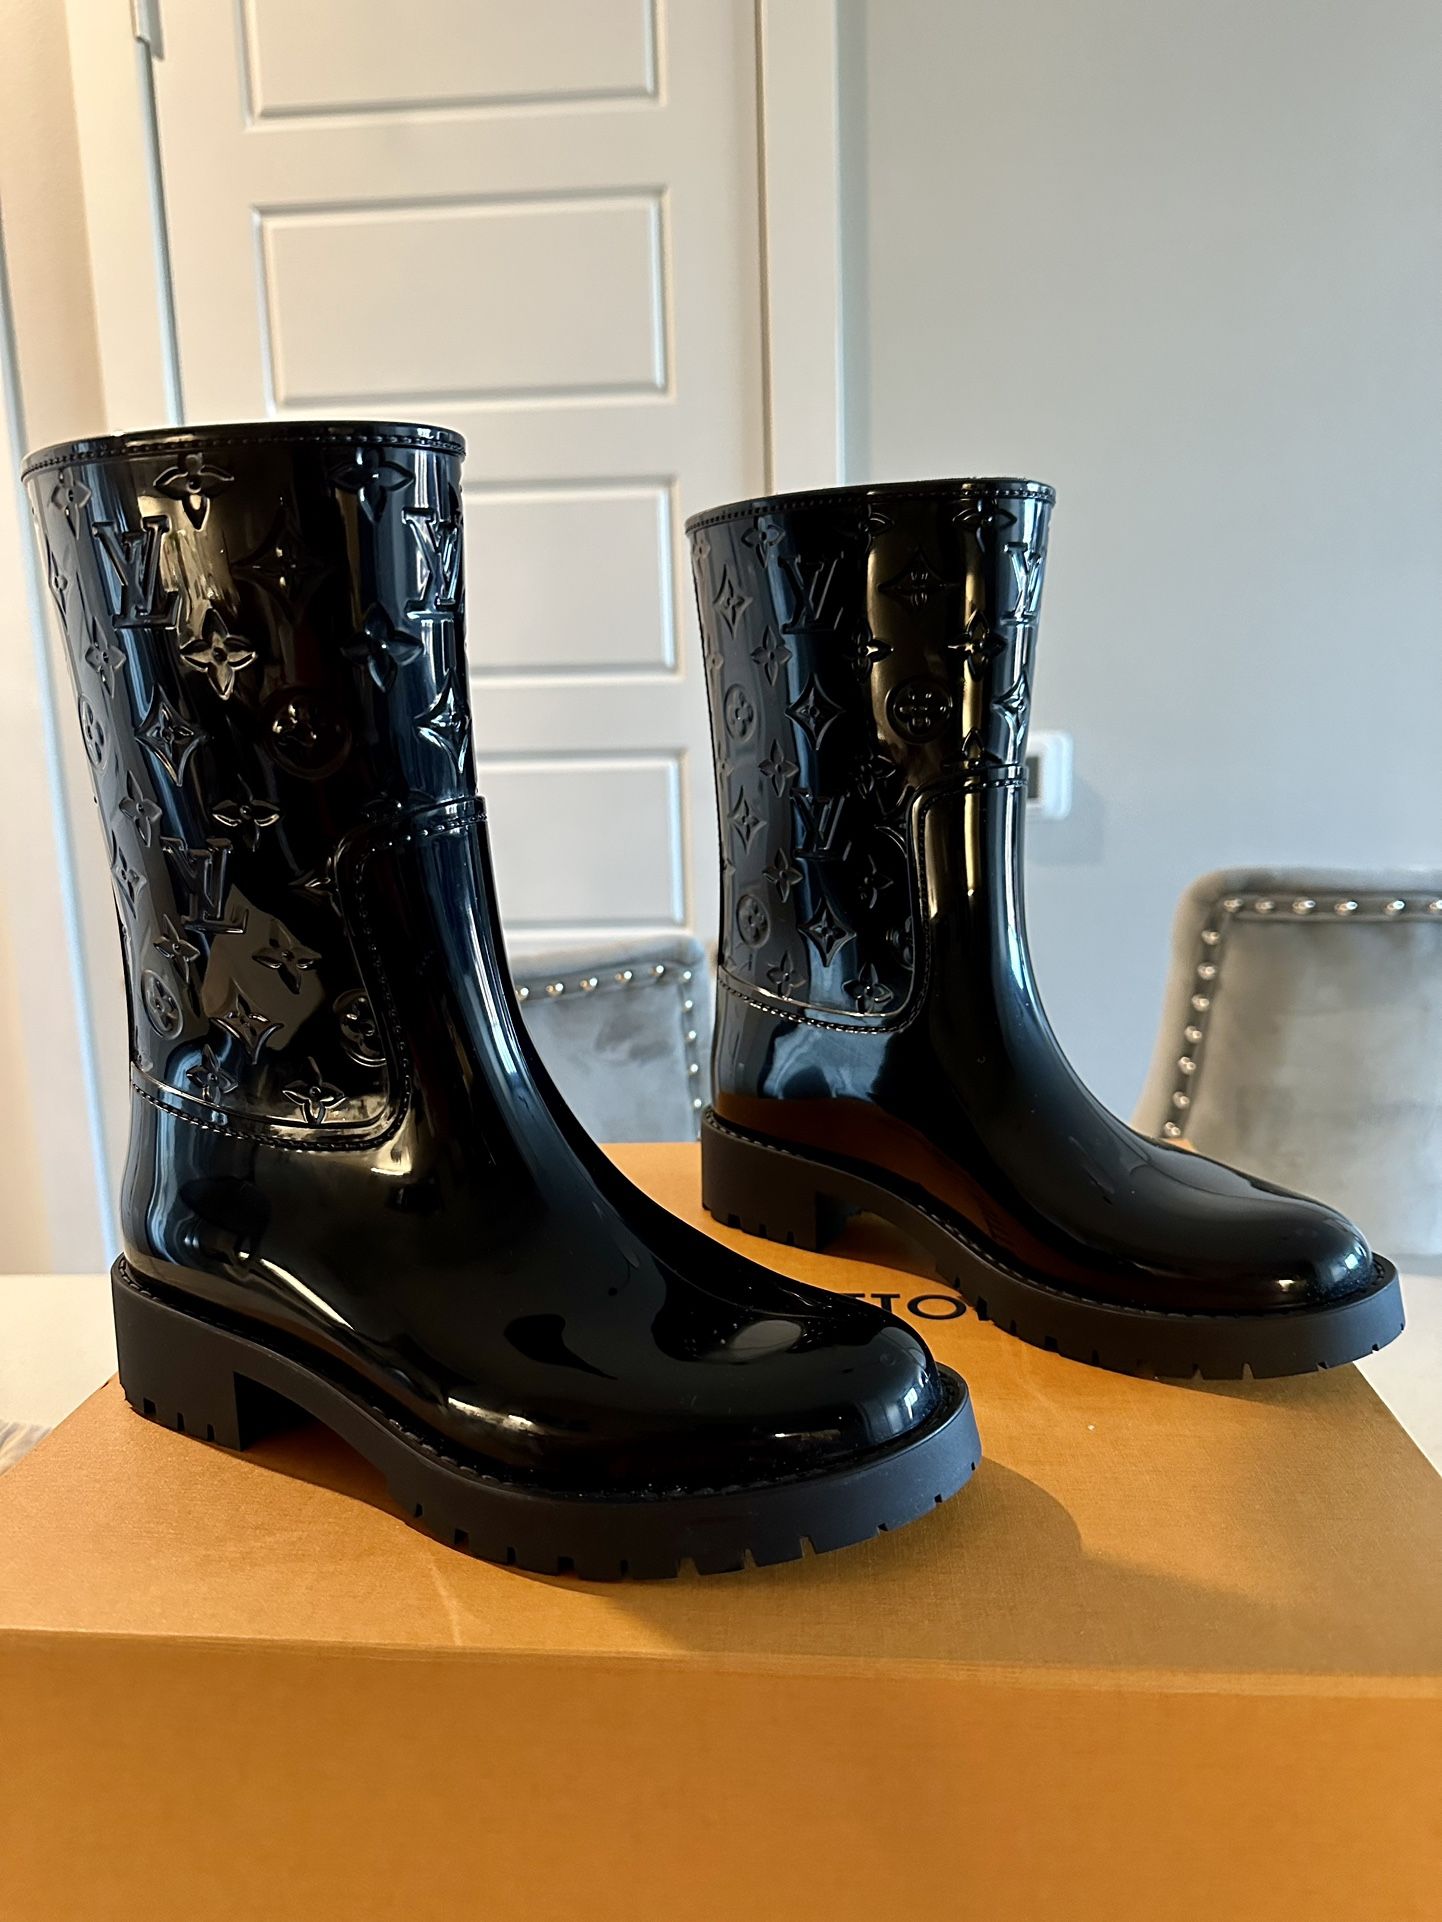 LV Rain Boots for Sale in Houston, TX - OfferUp